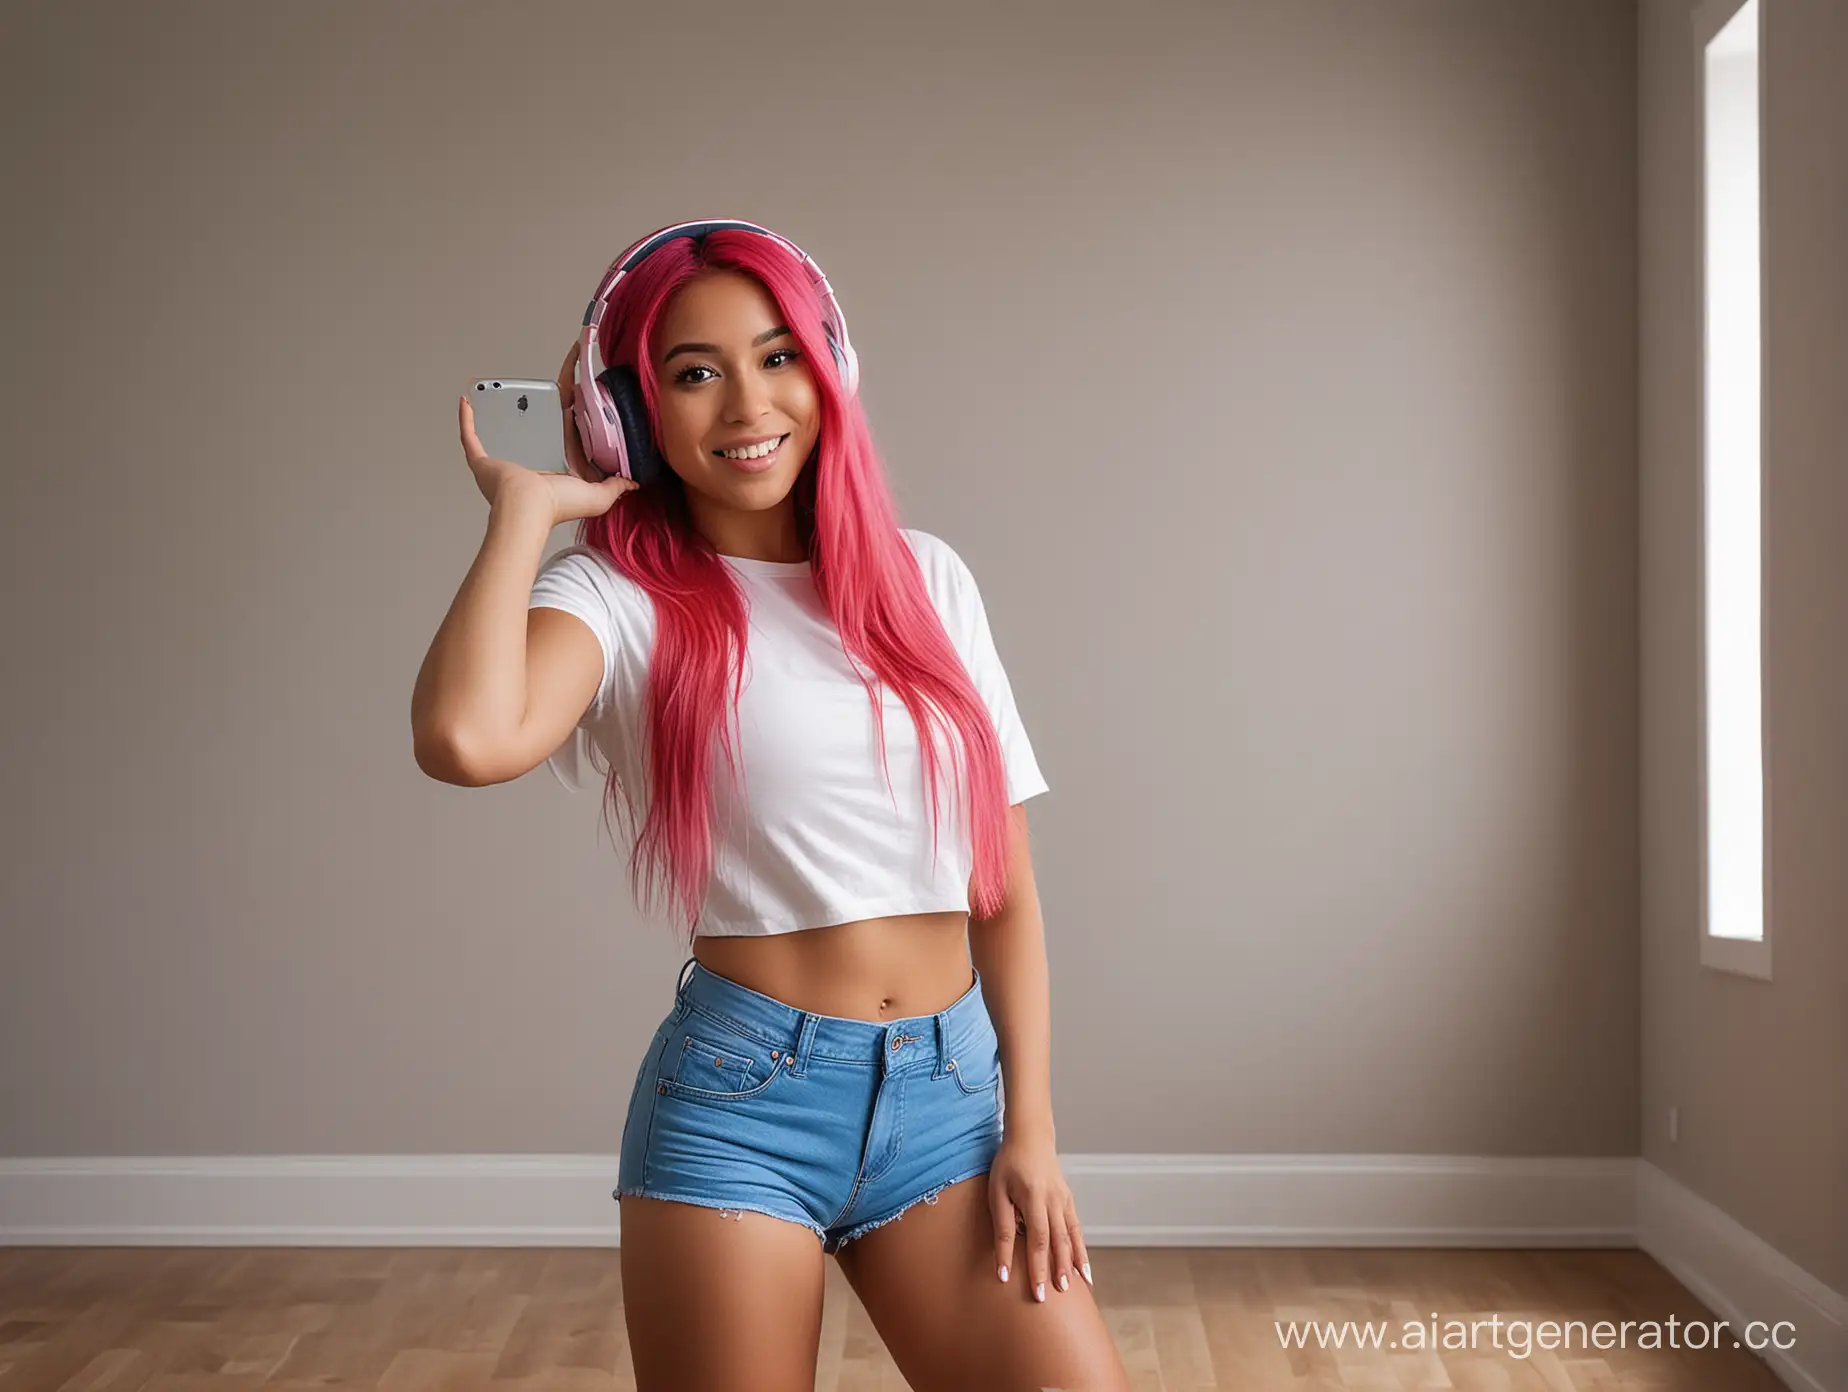 Latina-Woman-Posing-for-Selfie-with-Bright-Pink-Hair